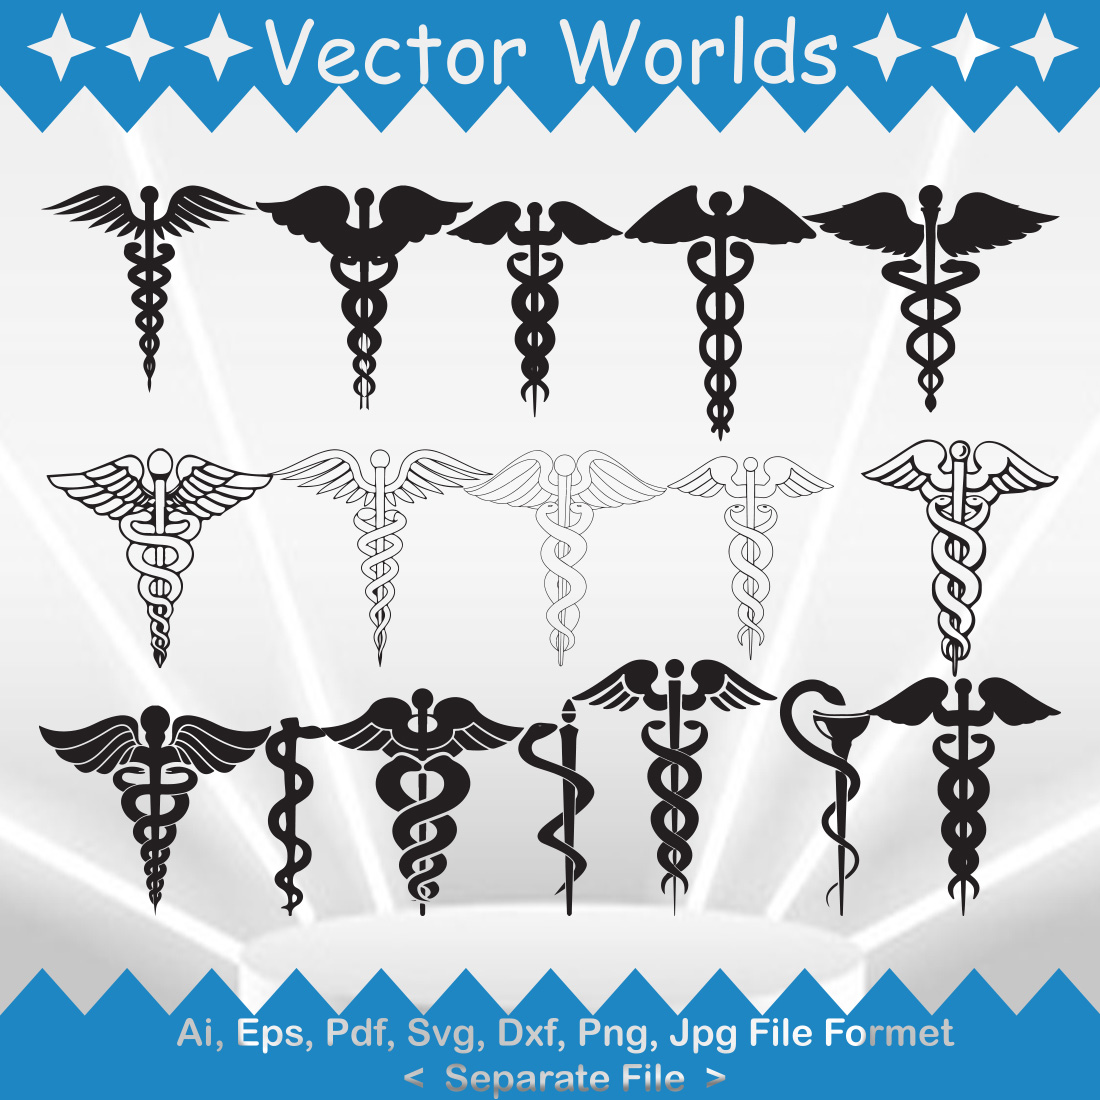 Collection of beautiful vector images of caduceus symbols.